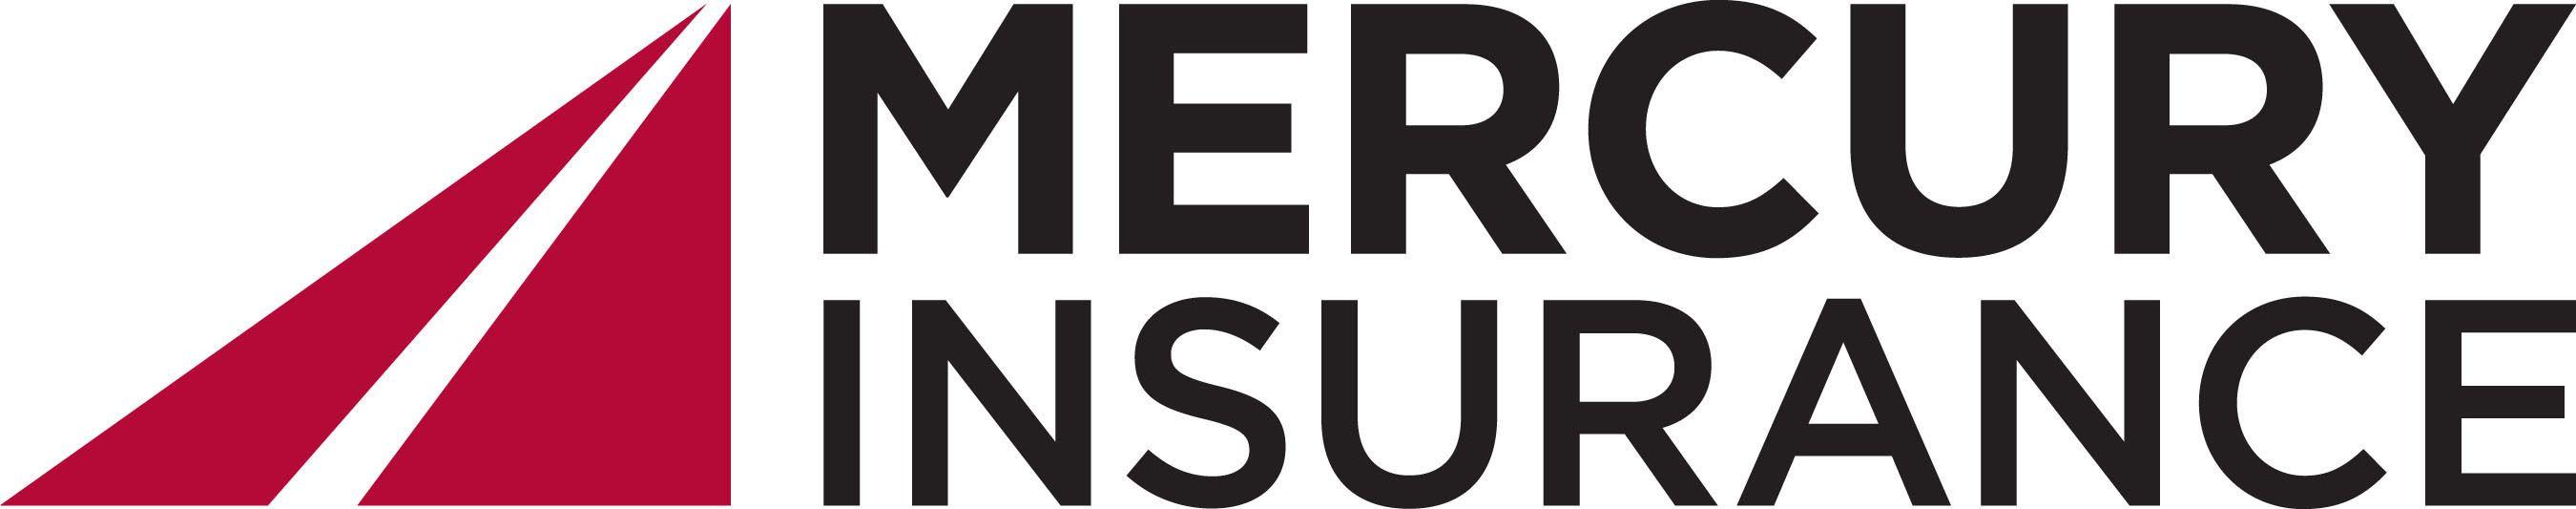 Mercury Insurance Logo - Halloween Tricks Lead To A Ghastly Number Of Insurance Claims